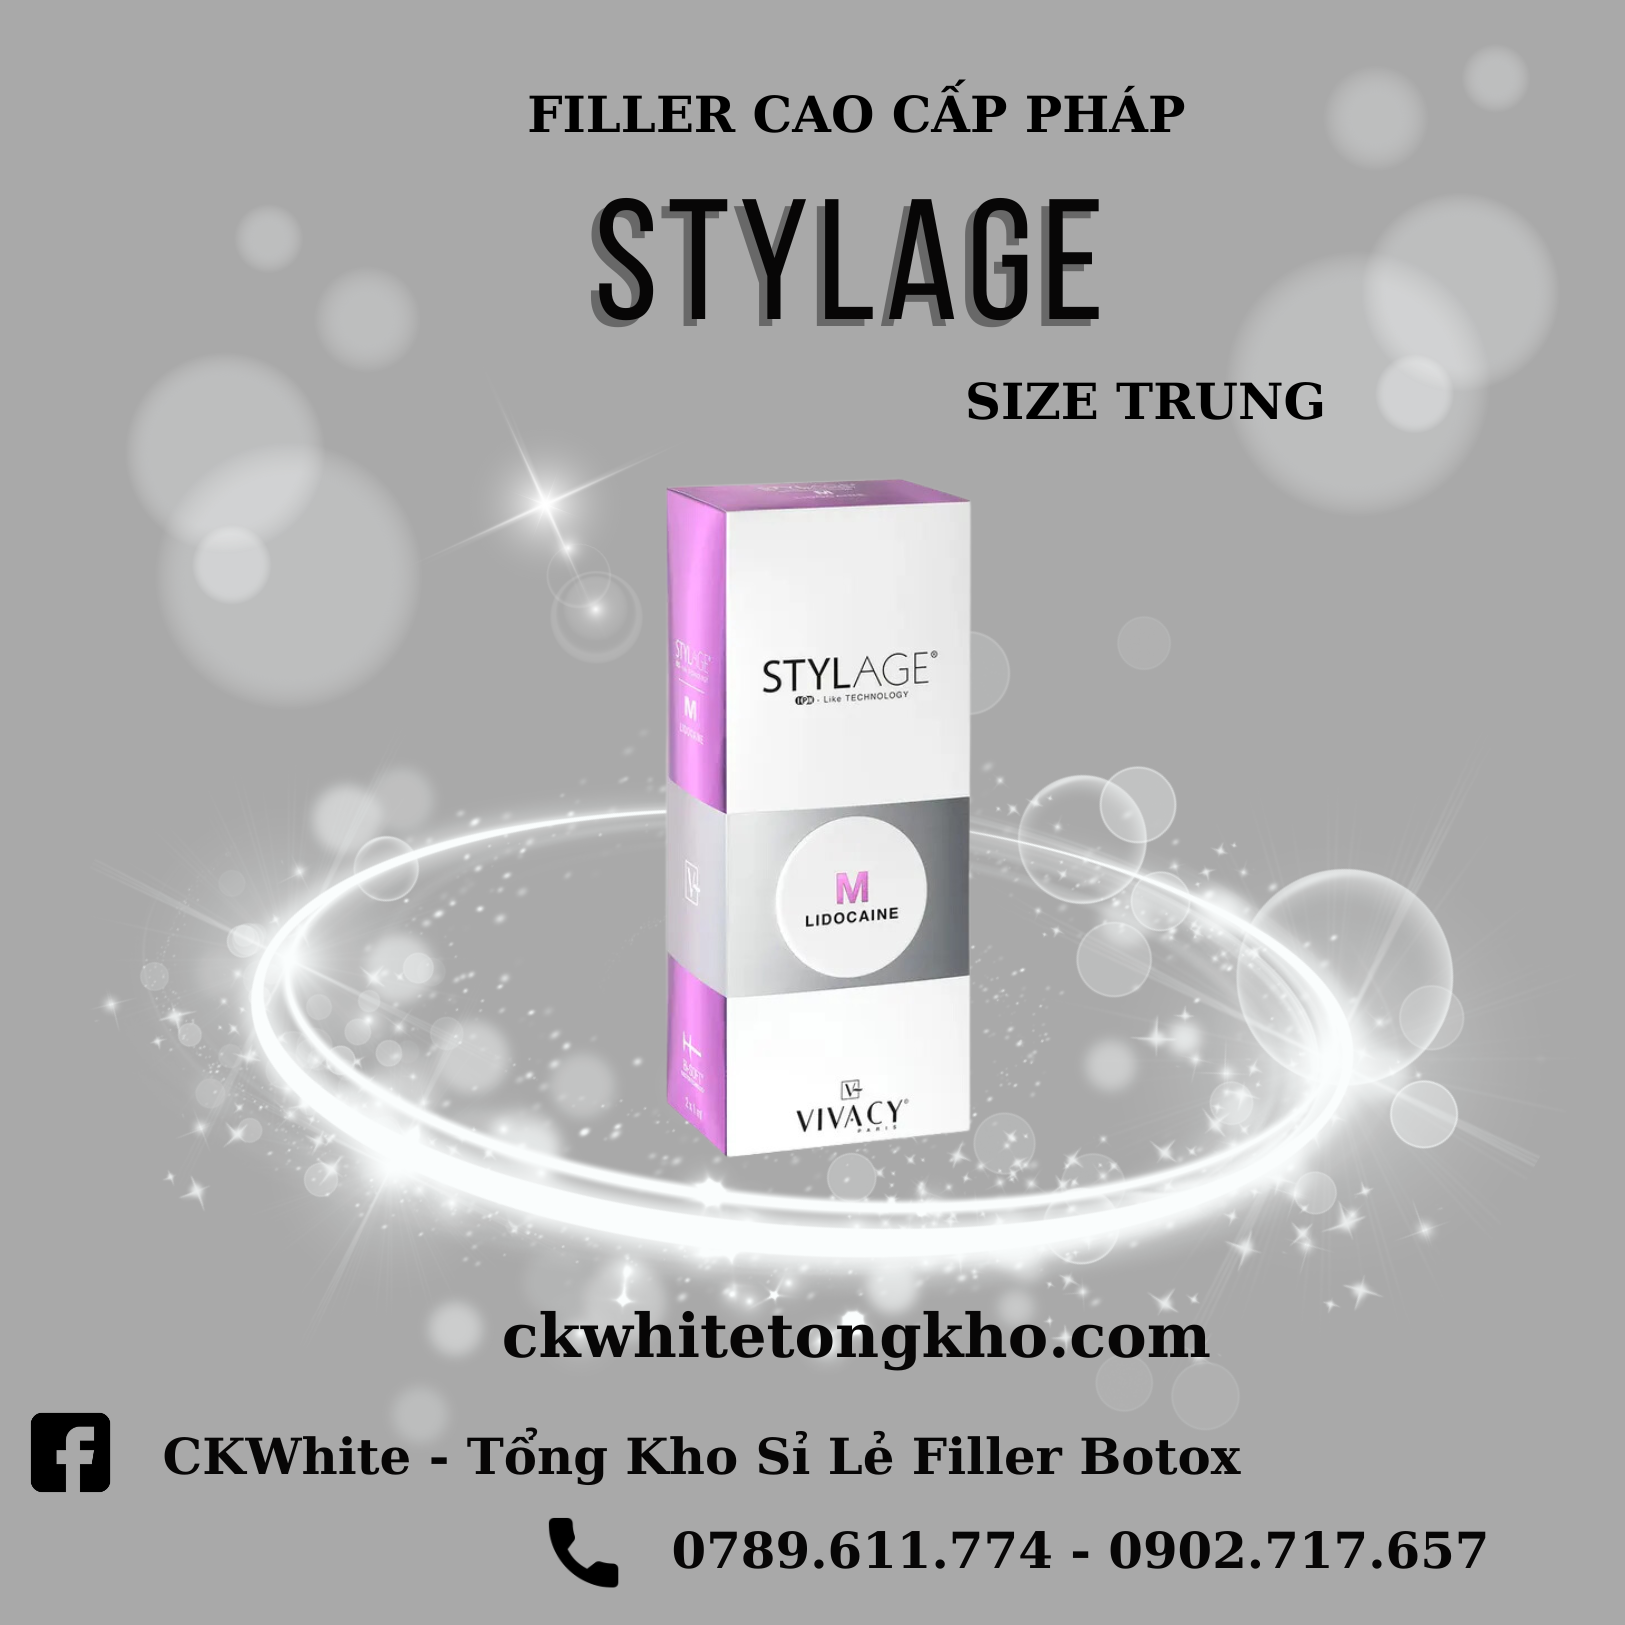 FILLER CAO CẤP PHÁP STYLAGE TRUNG